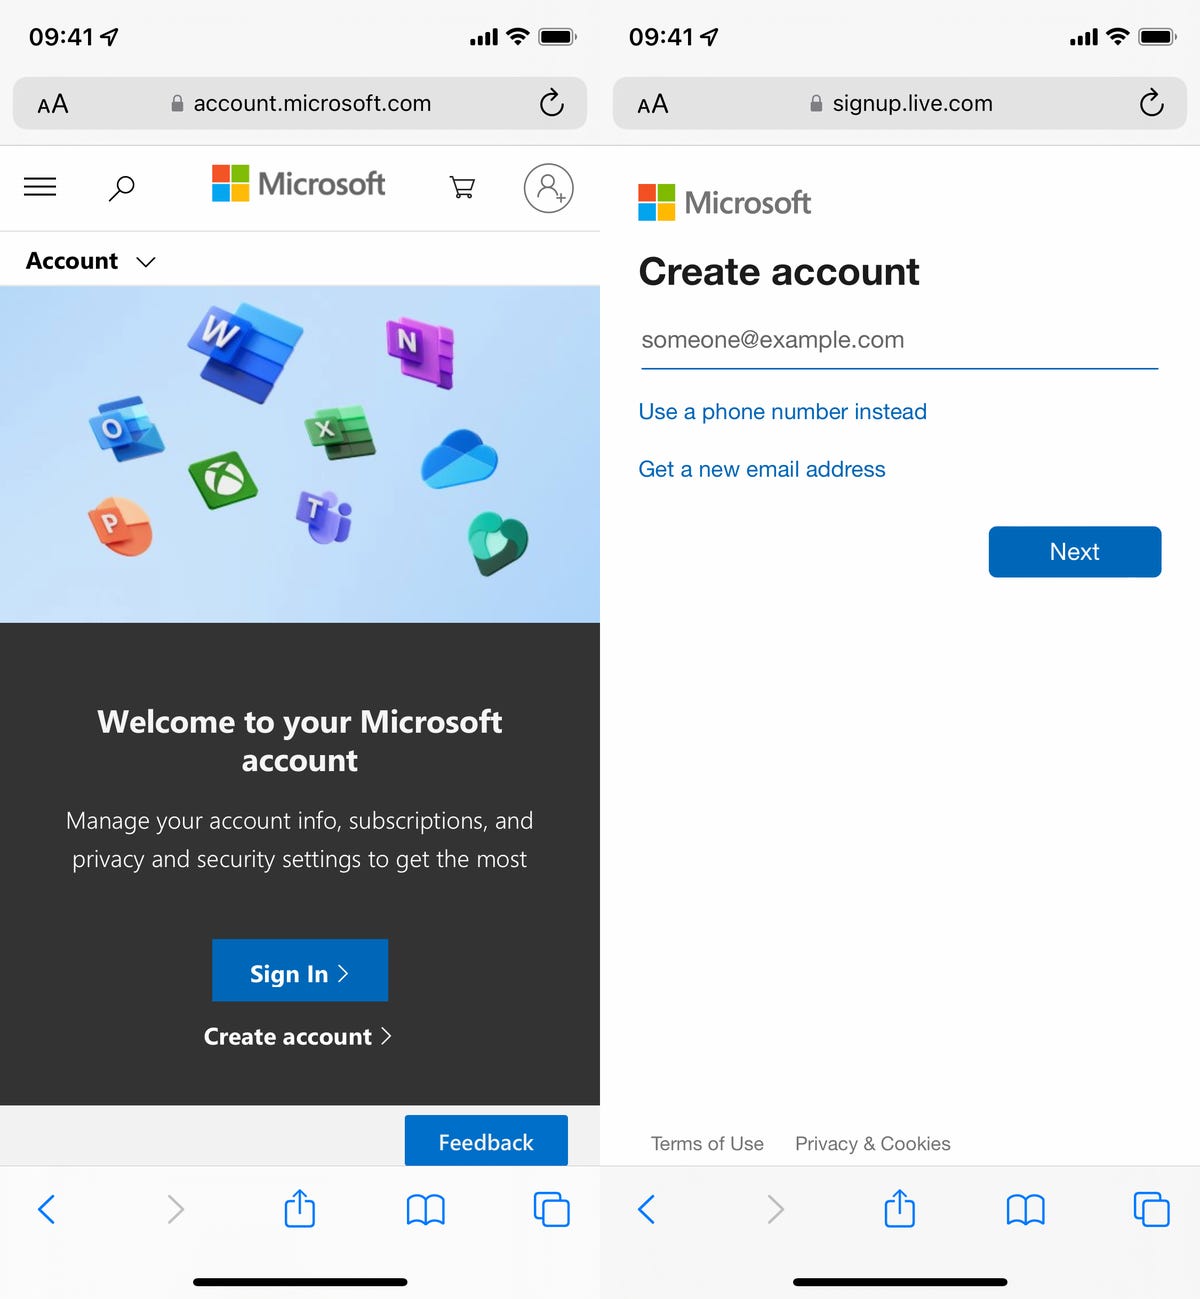 Microsoft's account signup page